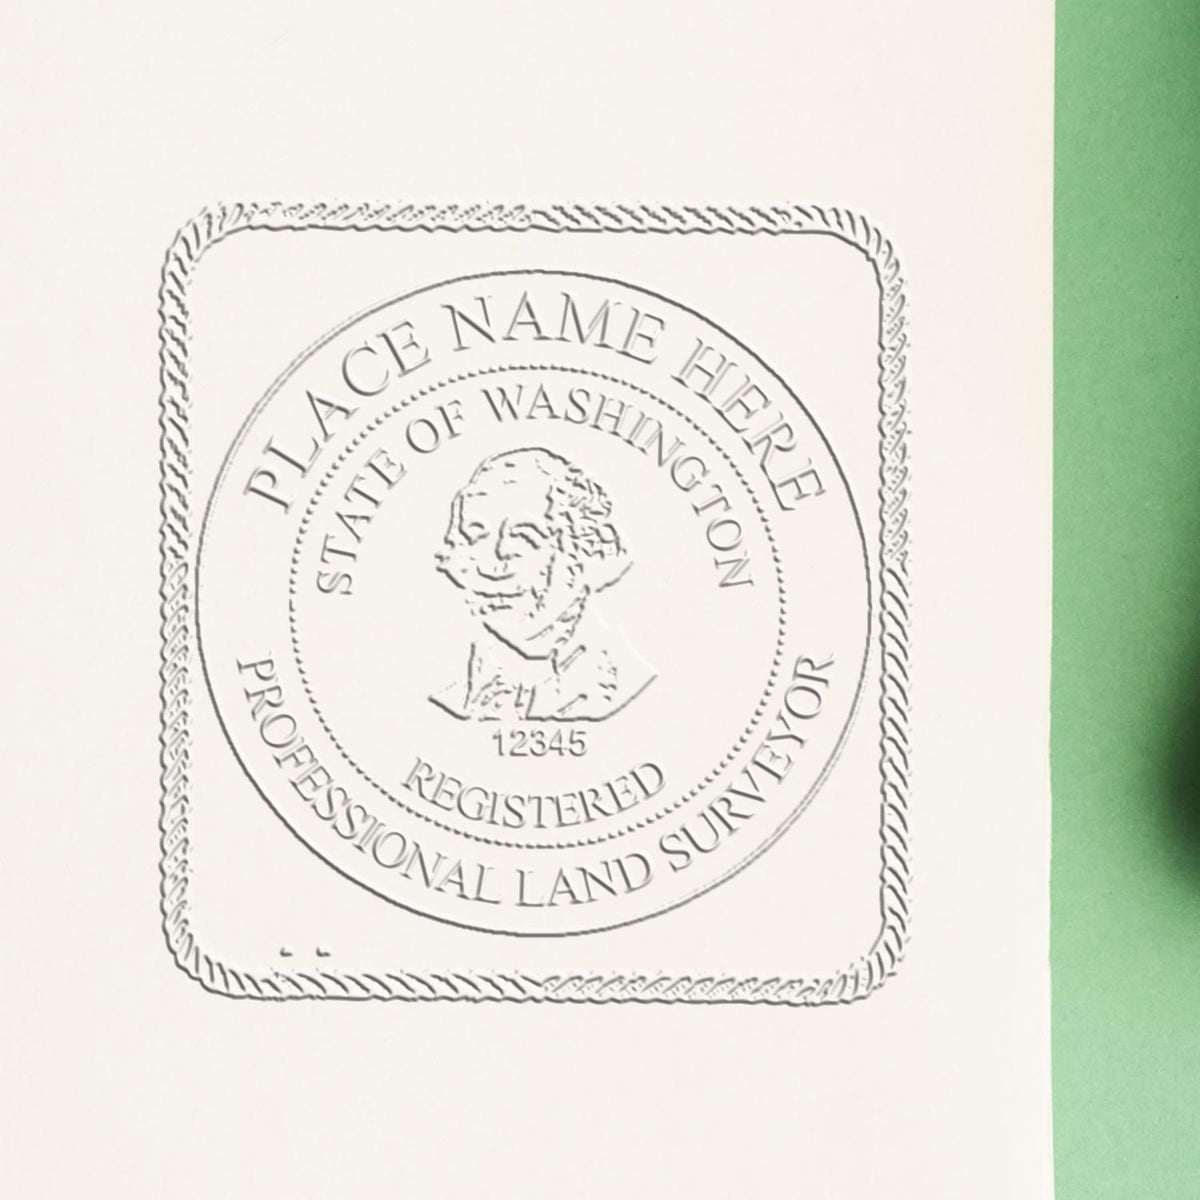 An in use photo of the Hybrid Washington Land Surveyor Seal showing a sample imprint on a cardstock